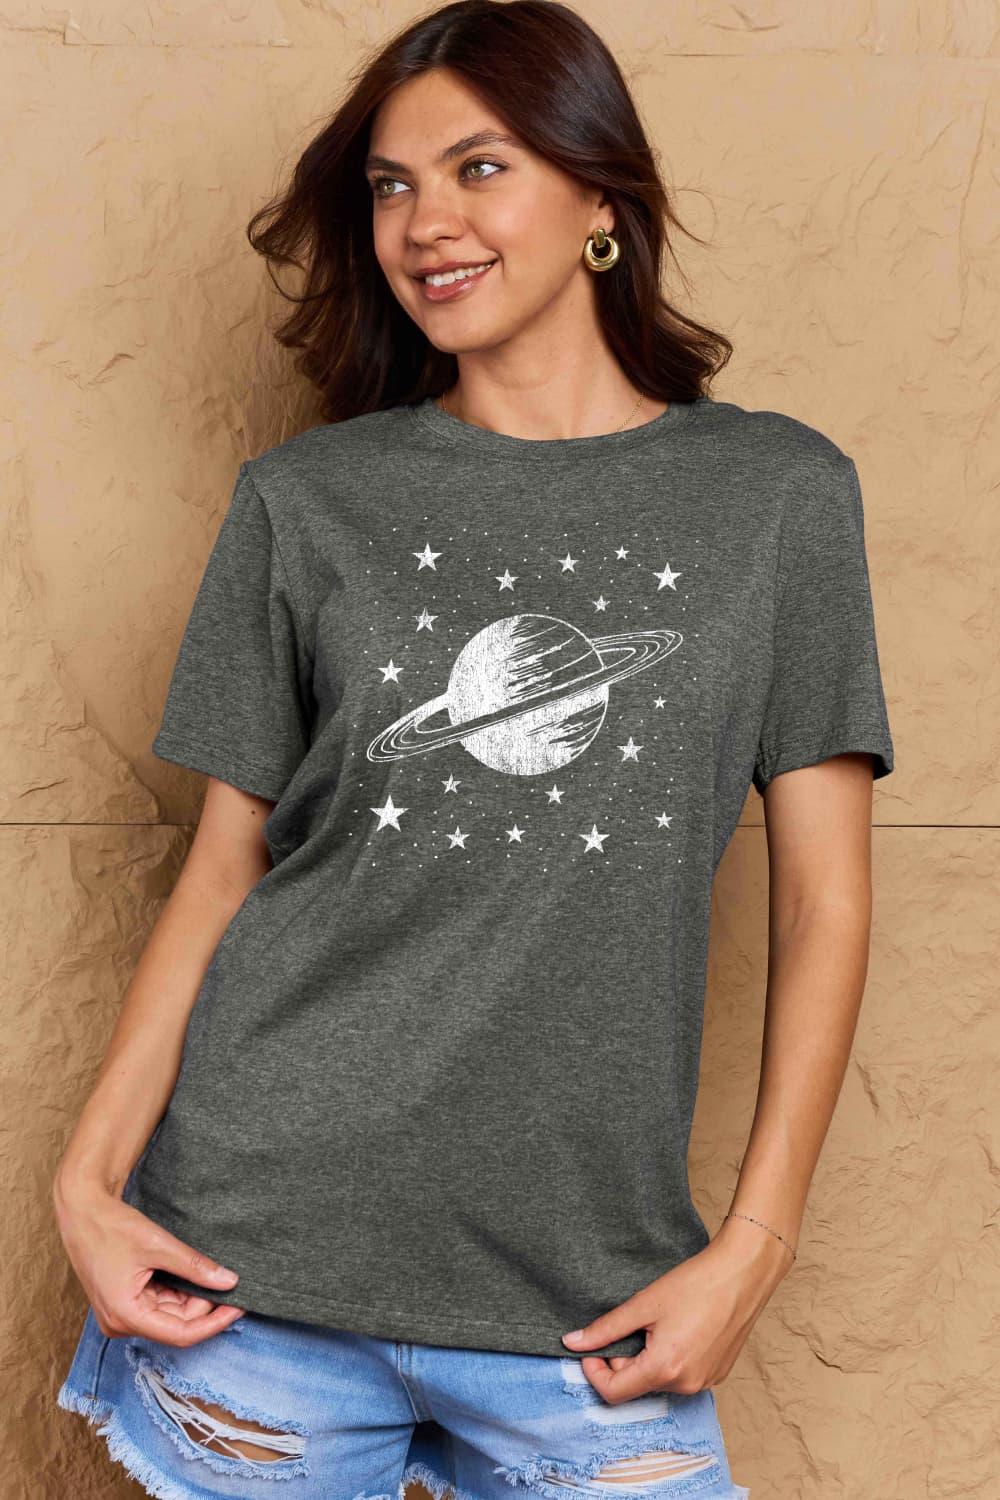 Simply Love Full Size Planet Graphic Cotton T-Shirt - Crazy Like a Daisy Boutique #